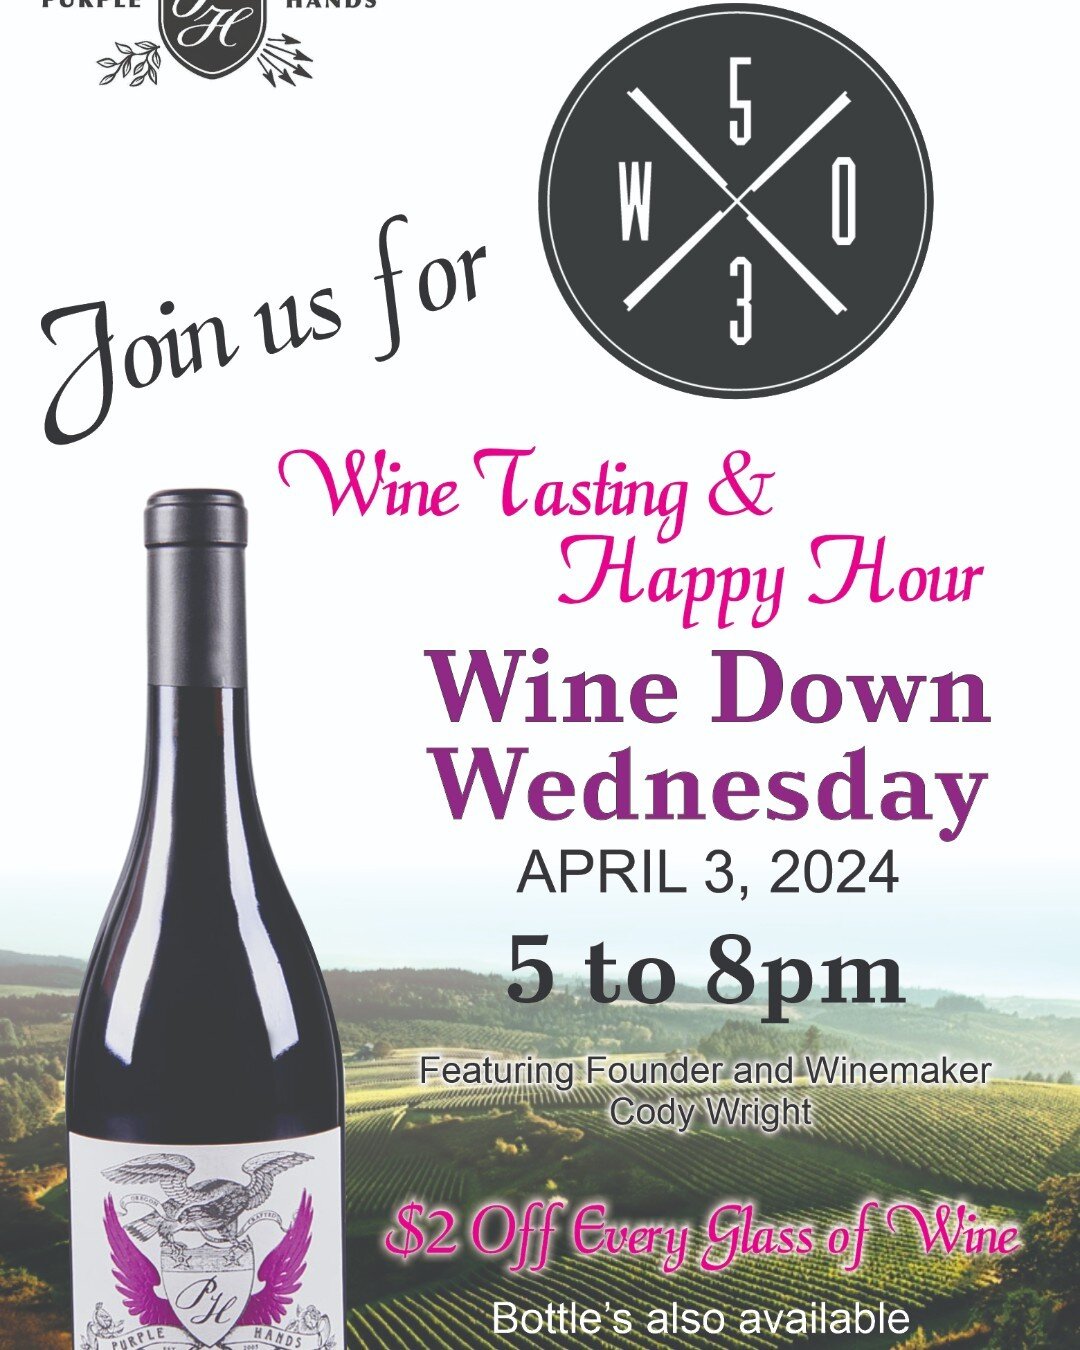 Join us this Wednesday (aka tomorrow!) for Wine Down Wednesday with Purple Hands Winery, featuring founder and winemaker Cody Wright! We'll have wine tasting and happy hour with $2 off wine glasses from 5PM to 8PM. We hope to see you there!